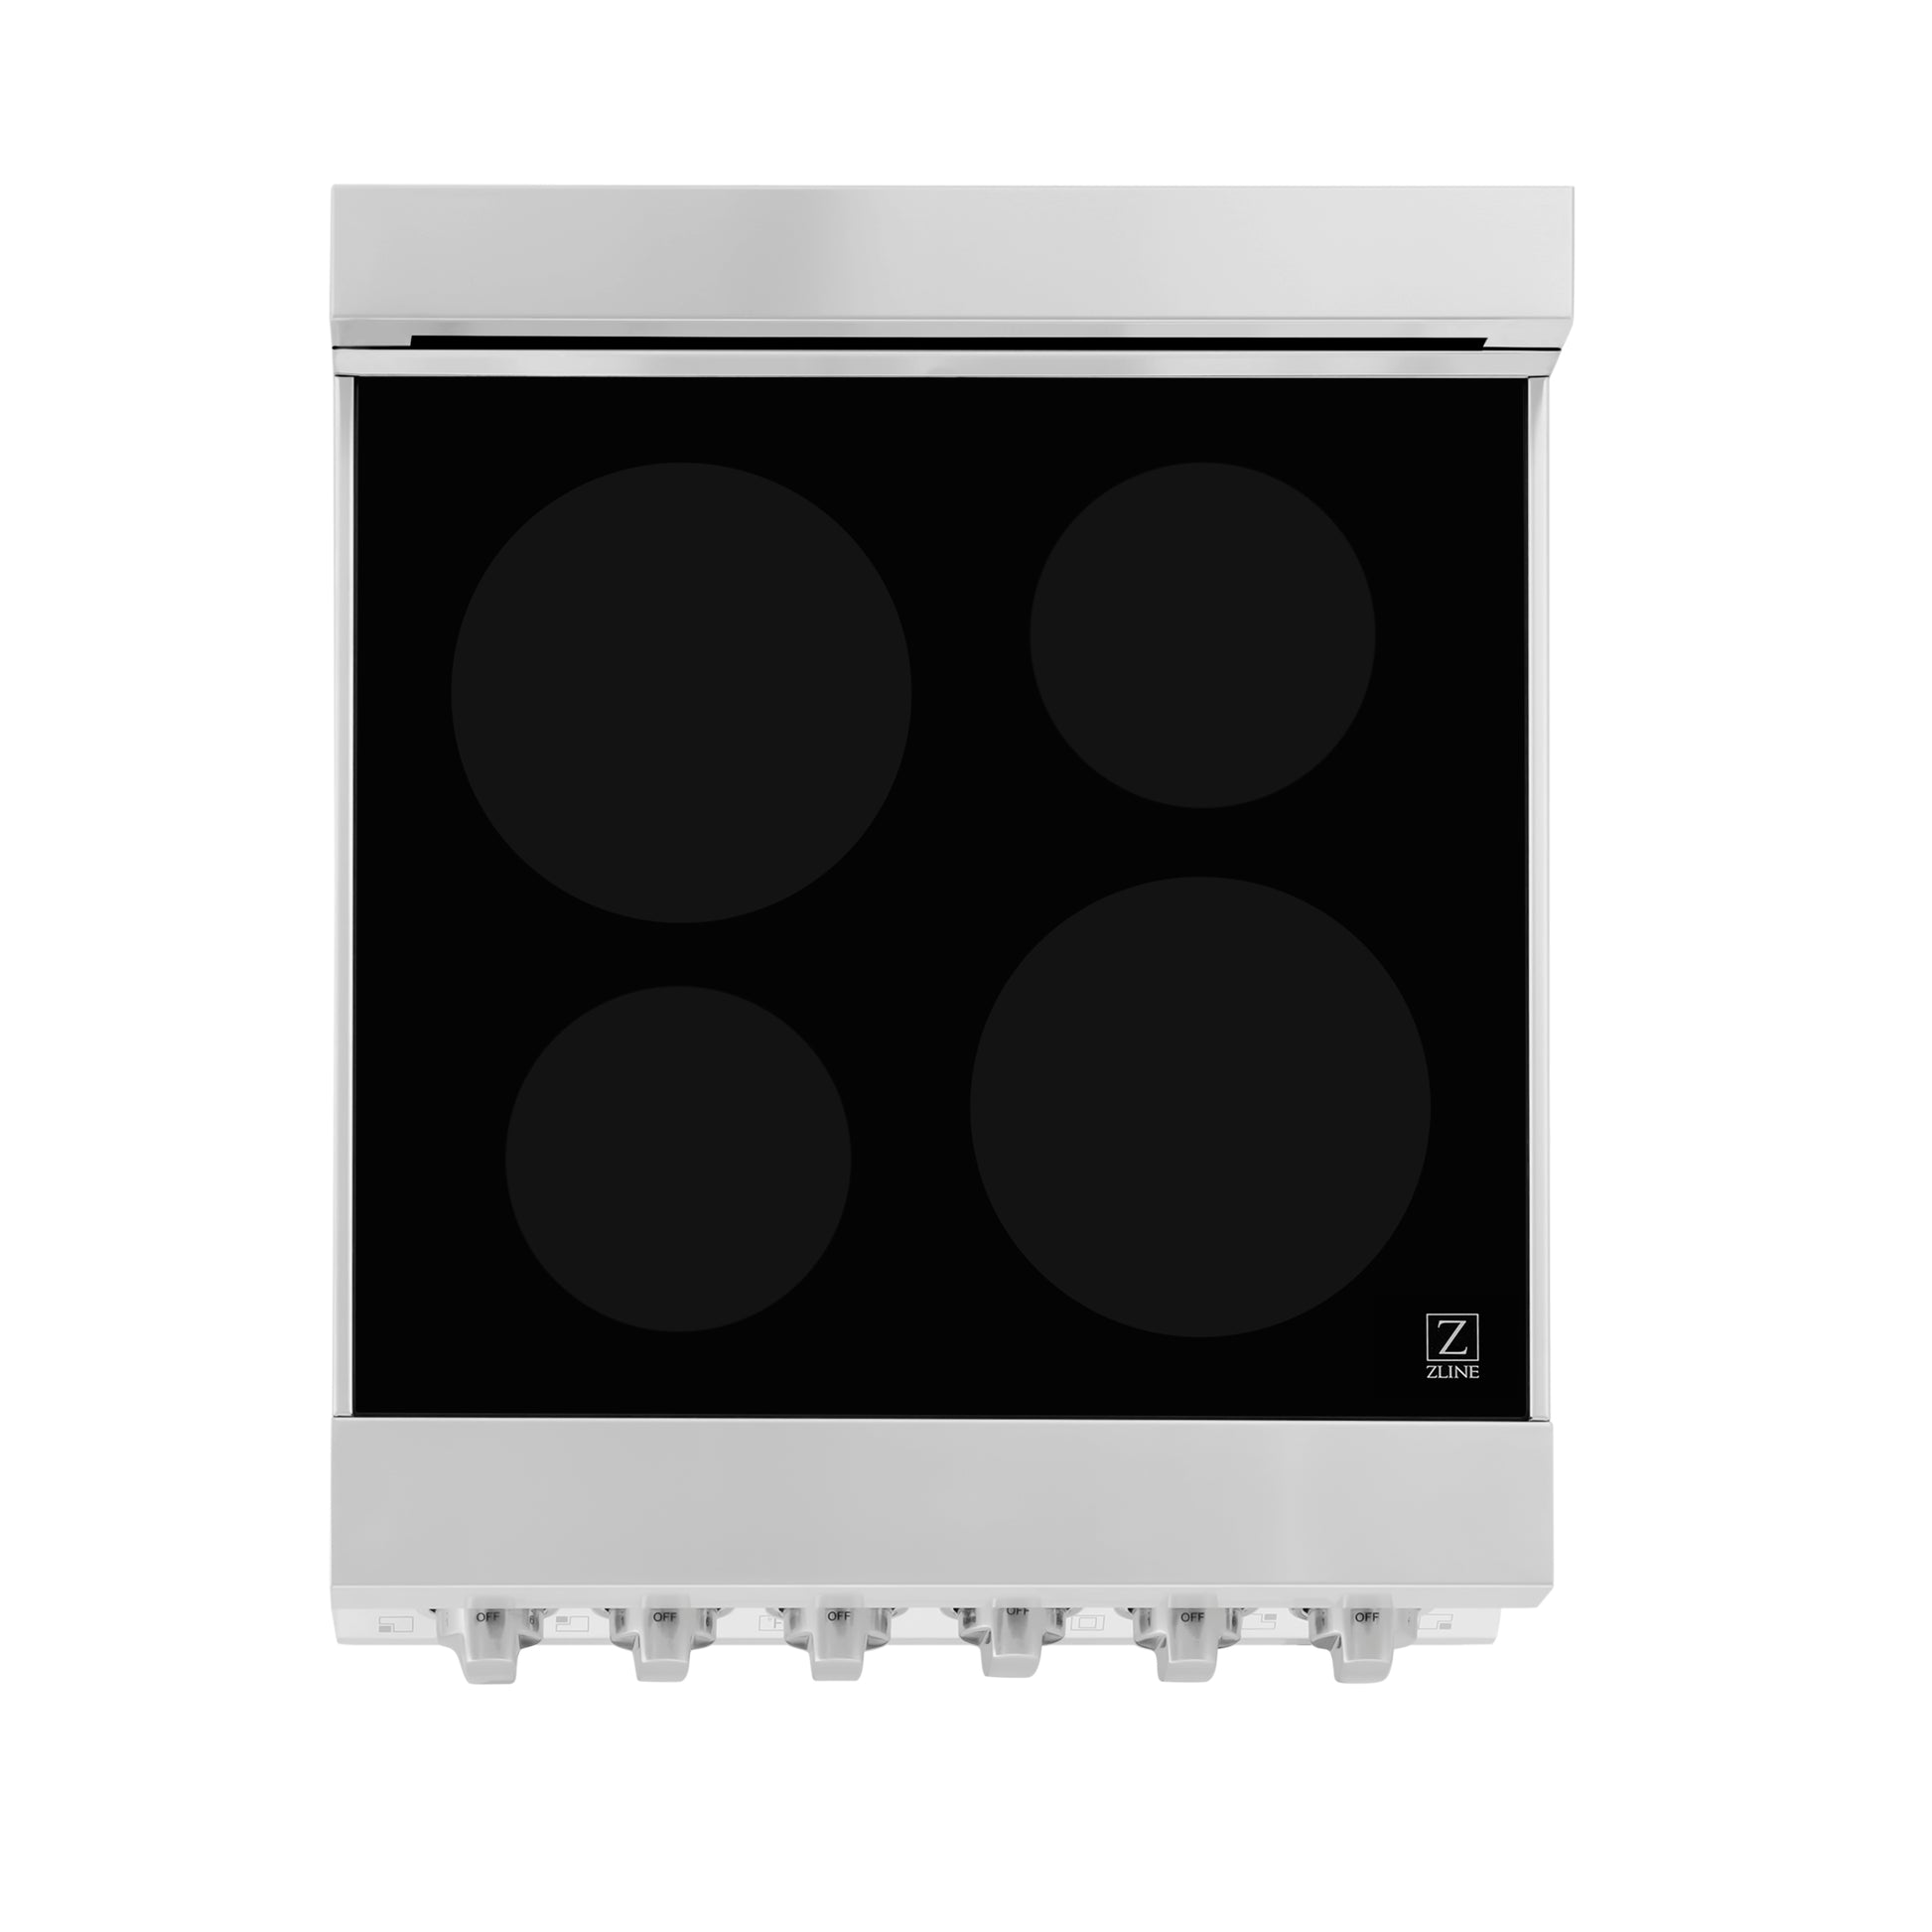 ZLINE 24 in. 2.8 cu. ft. Induction Range with a 4 Element Stove and Electric Oven in Black Matte (RAIND-BLM-24) from above showing induction cooking elements on cooktop.